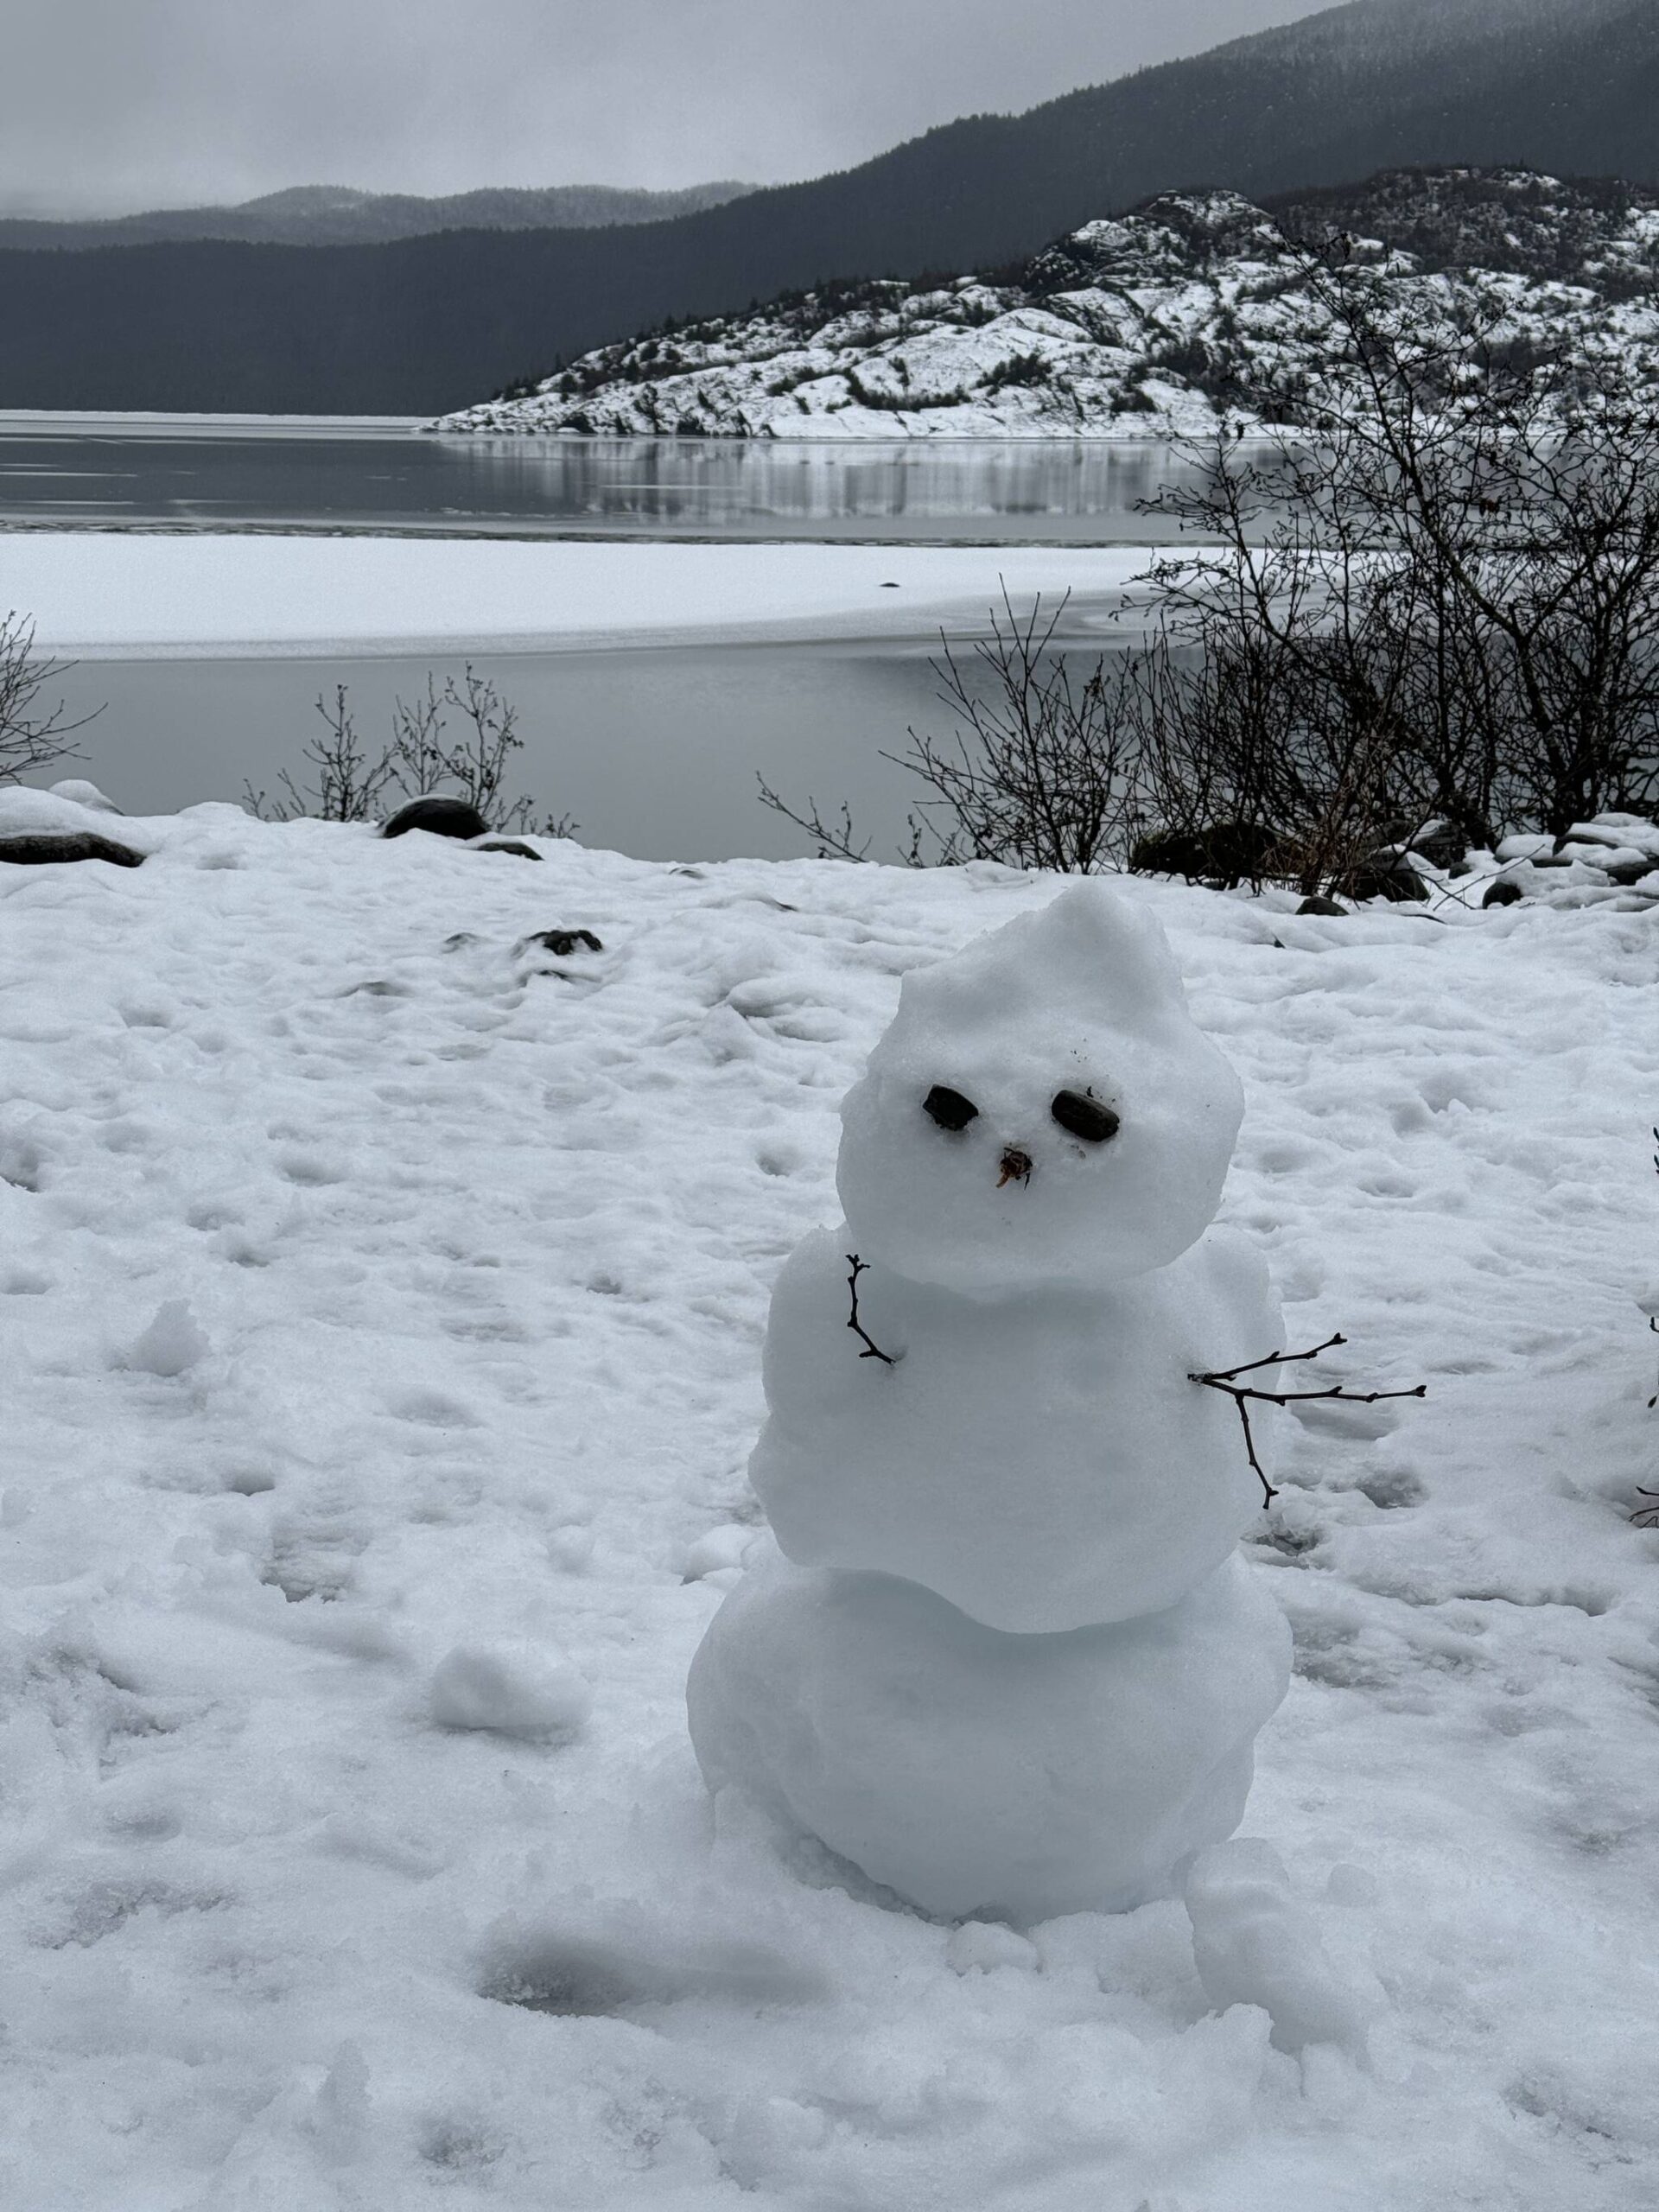 A snow creature along the Nugget Falls Trail on Dec. 24. (Photo by Deana Barajas)